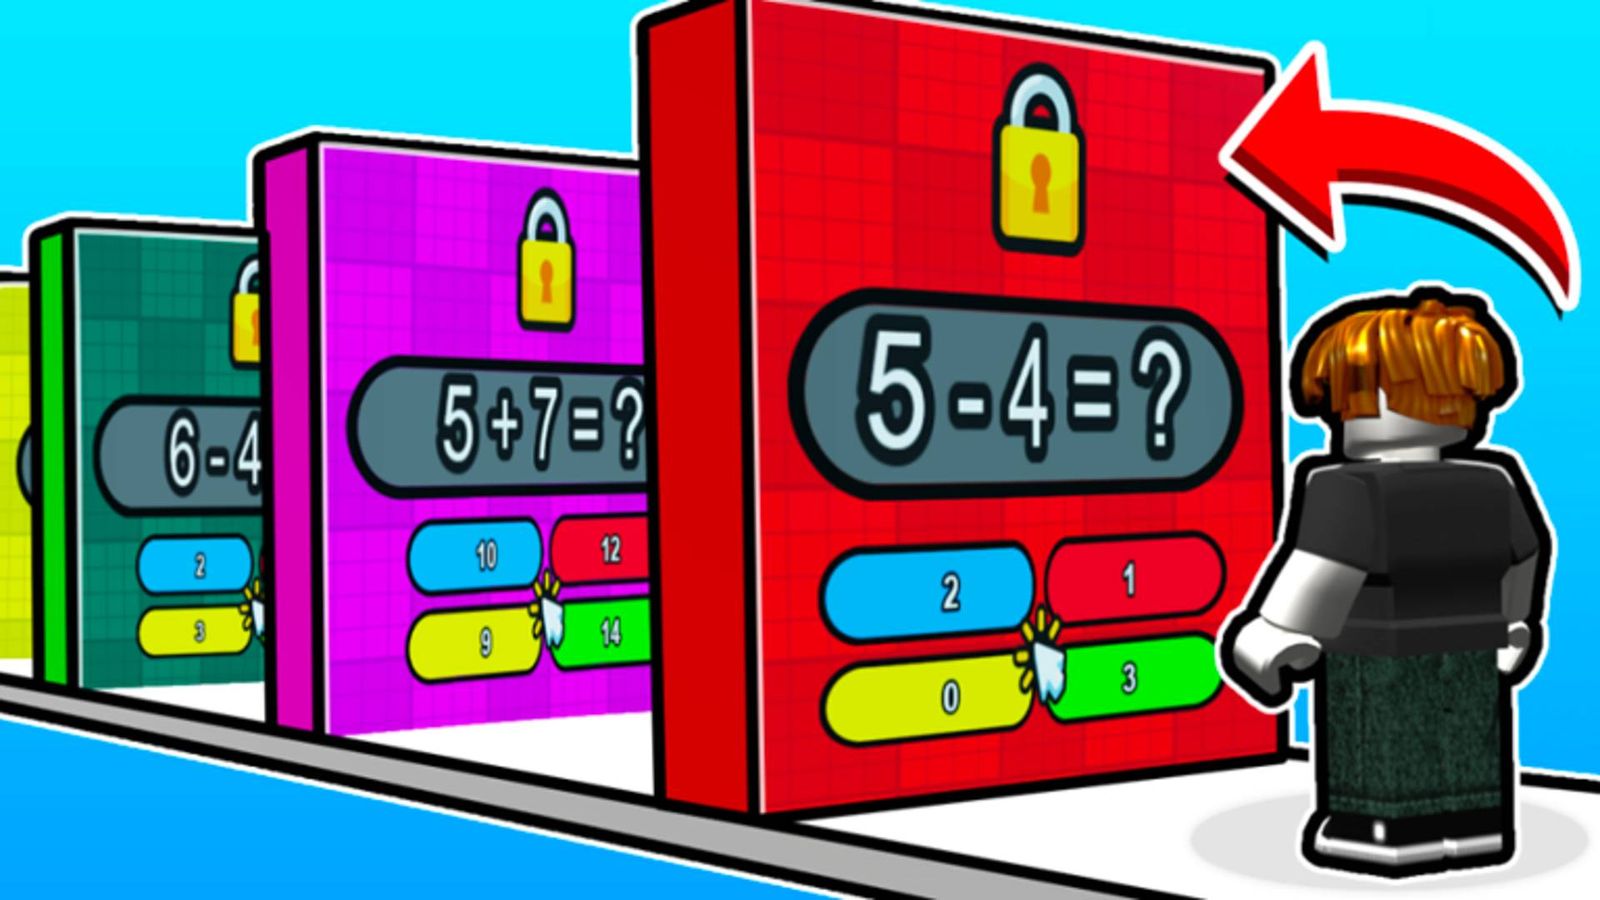 A Roblox character solving maths problems in Math Wall Simulator.